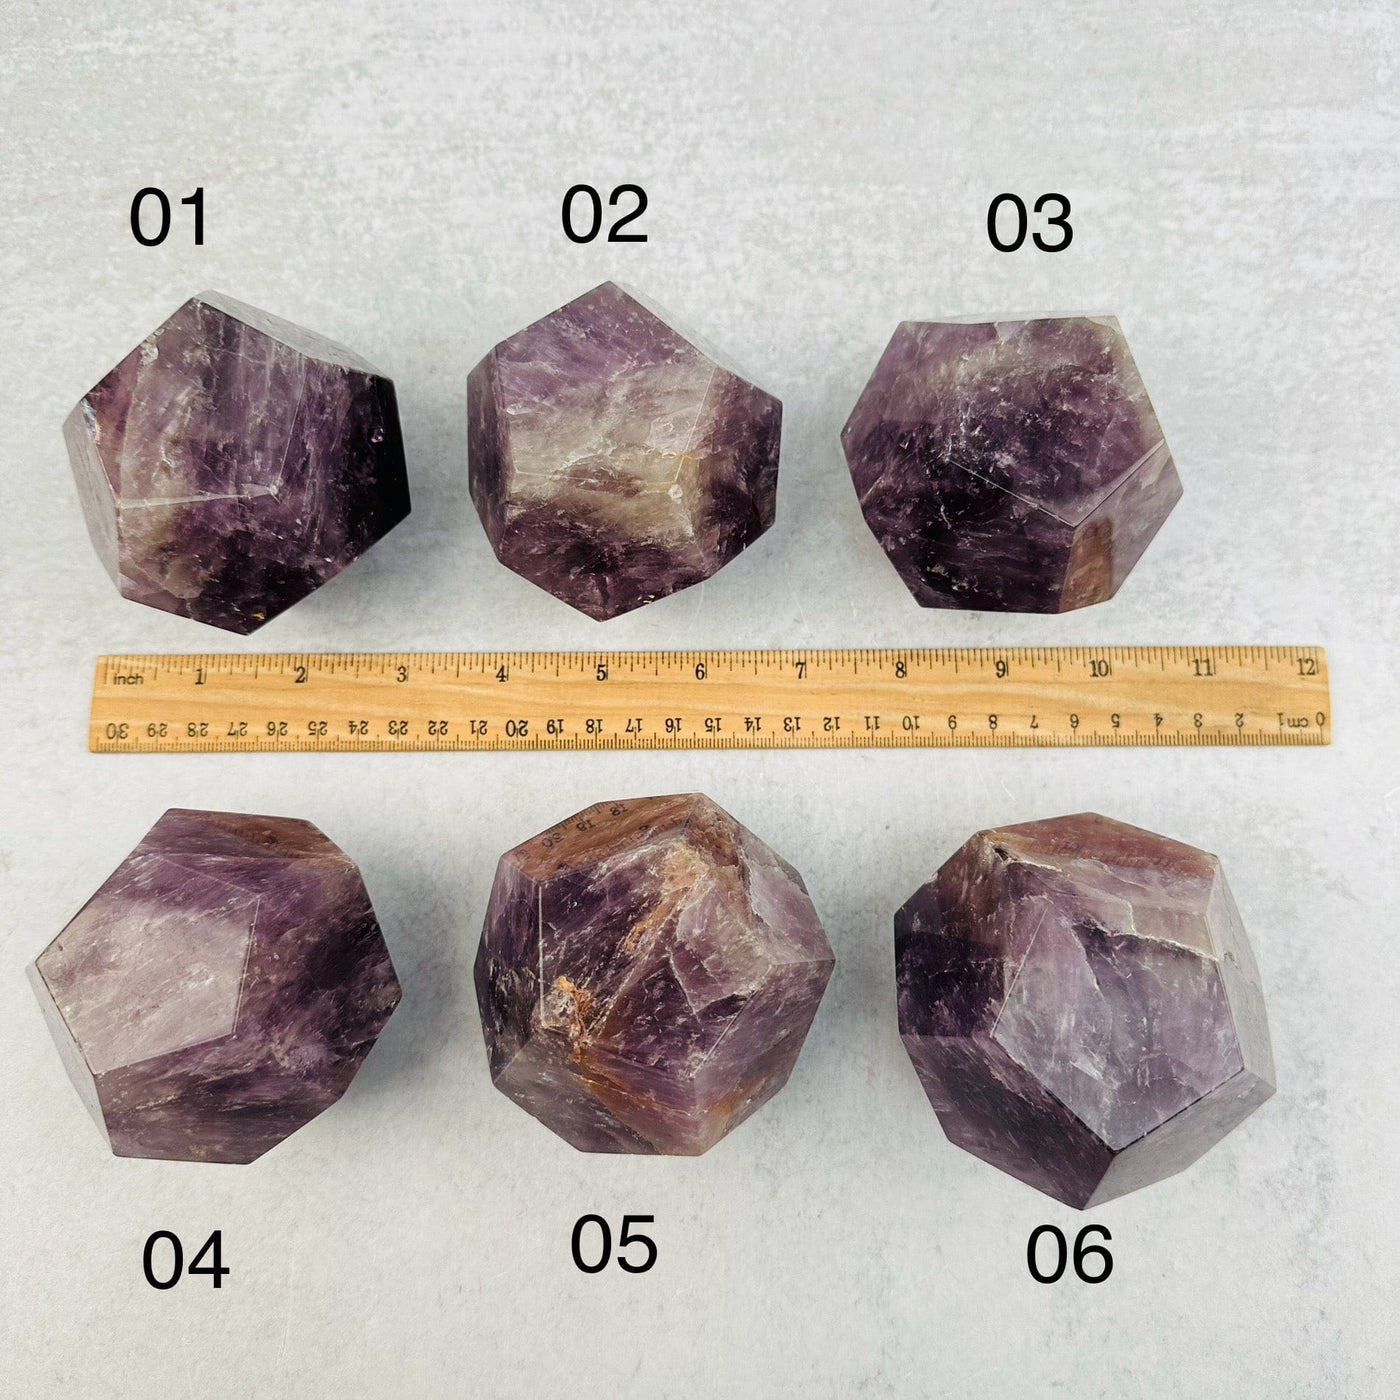 Amethyst Crystal Dodecahedron - Geometric Shape - YOU CHOOSE next to a ruler for size reference 